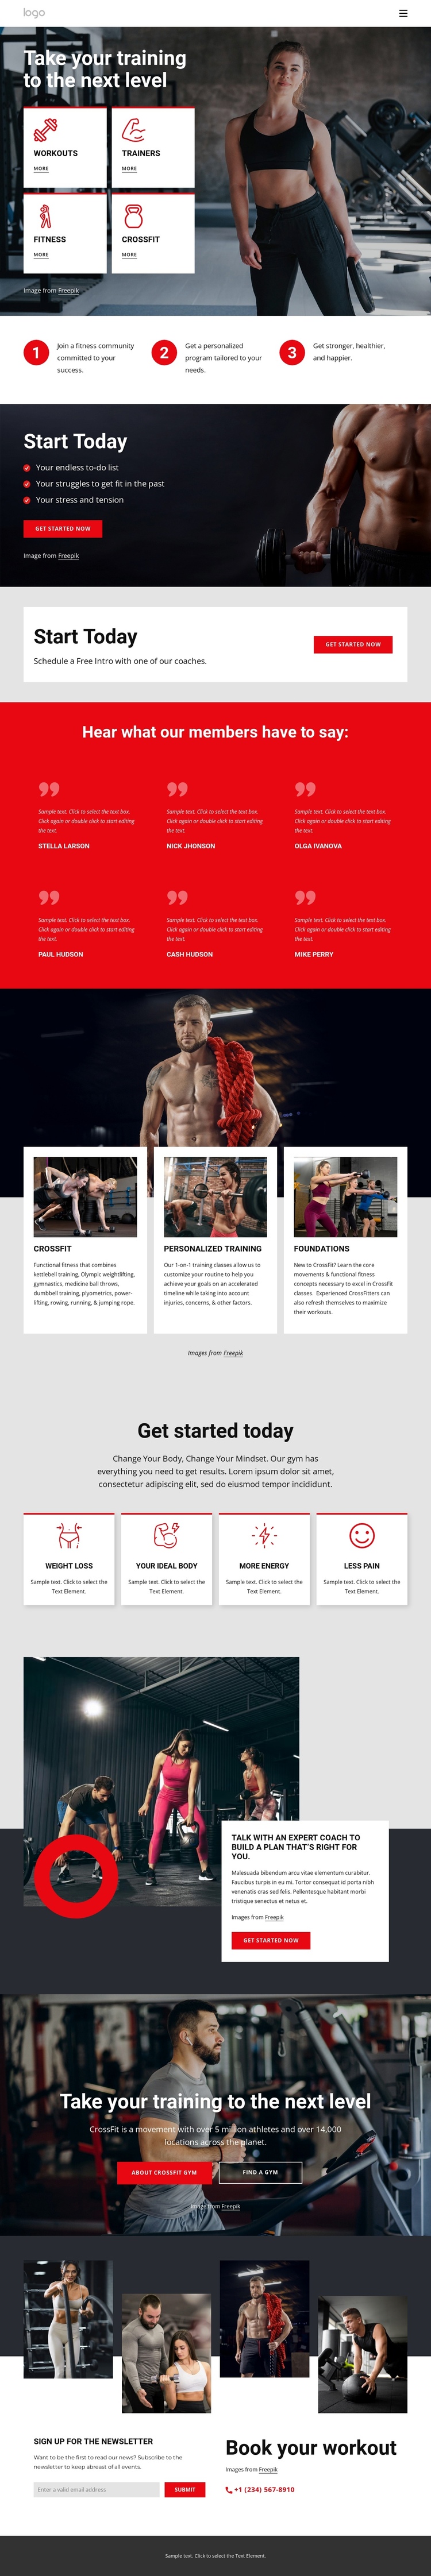 Crossfit training community One Page Template